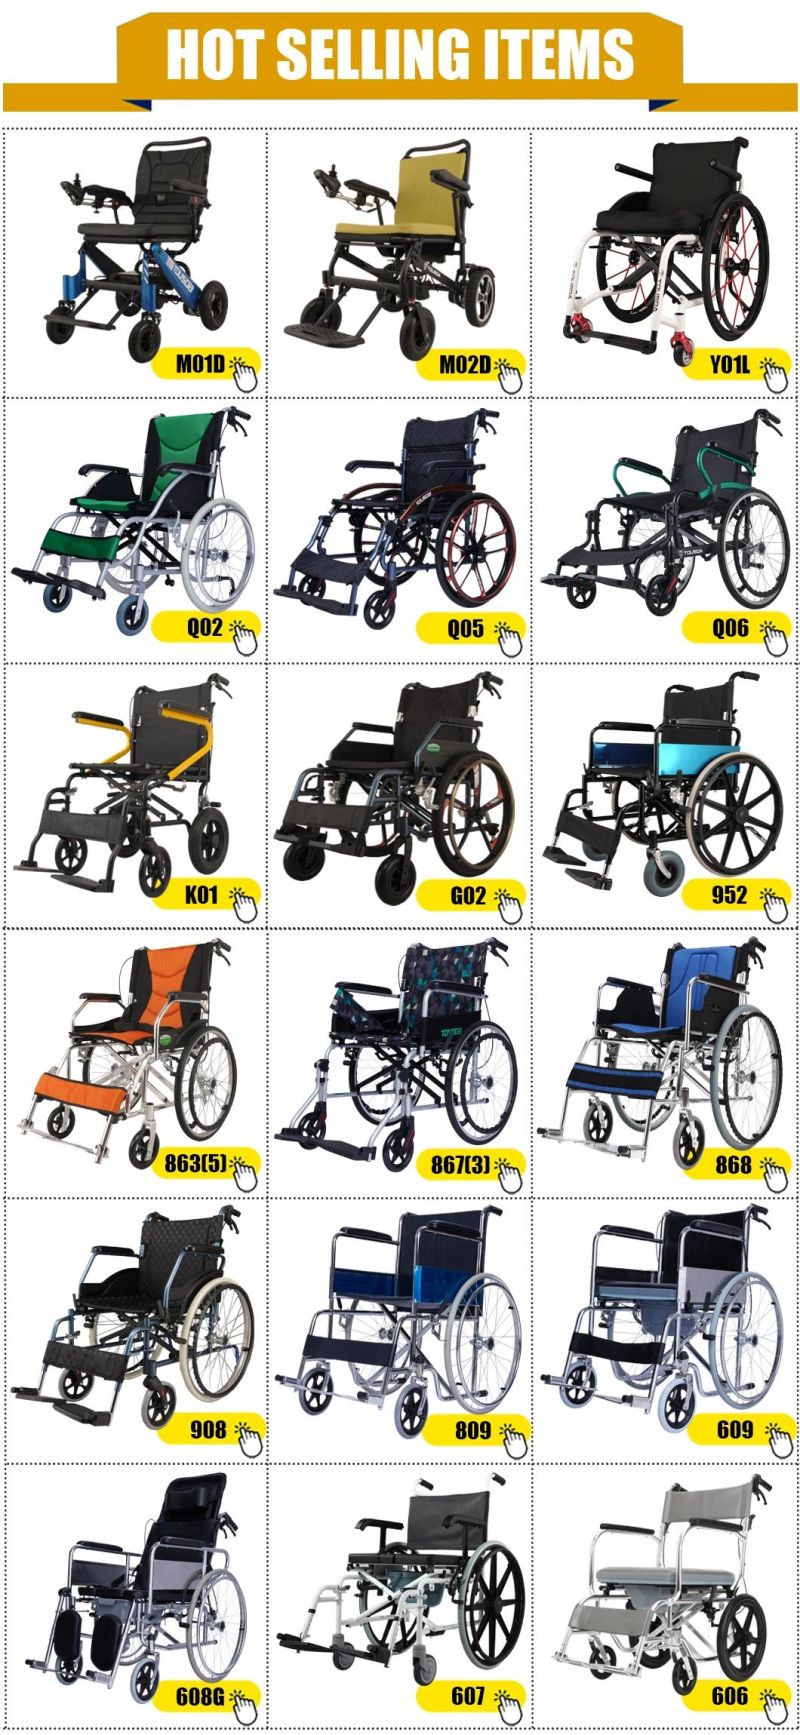 Aluminum Alloy Multifunctional Walker Rollator with Storage Bag for Old People